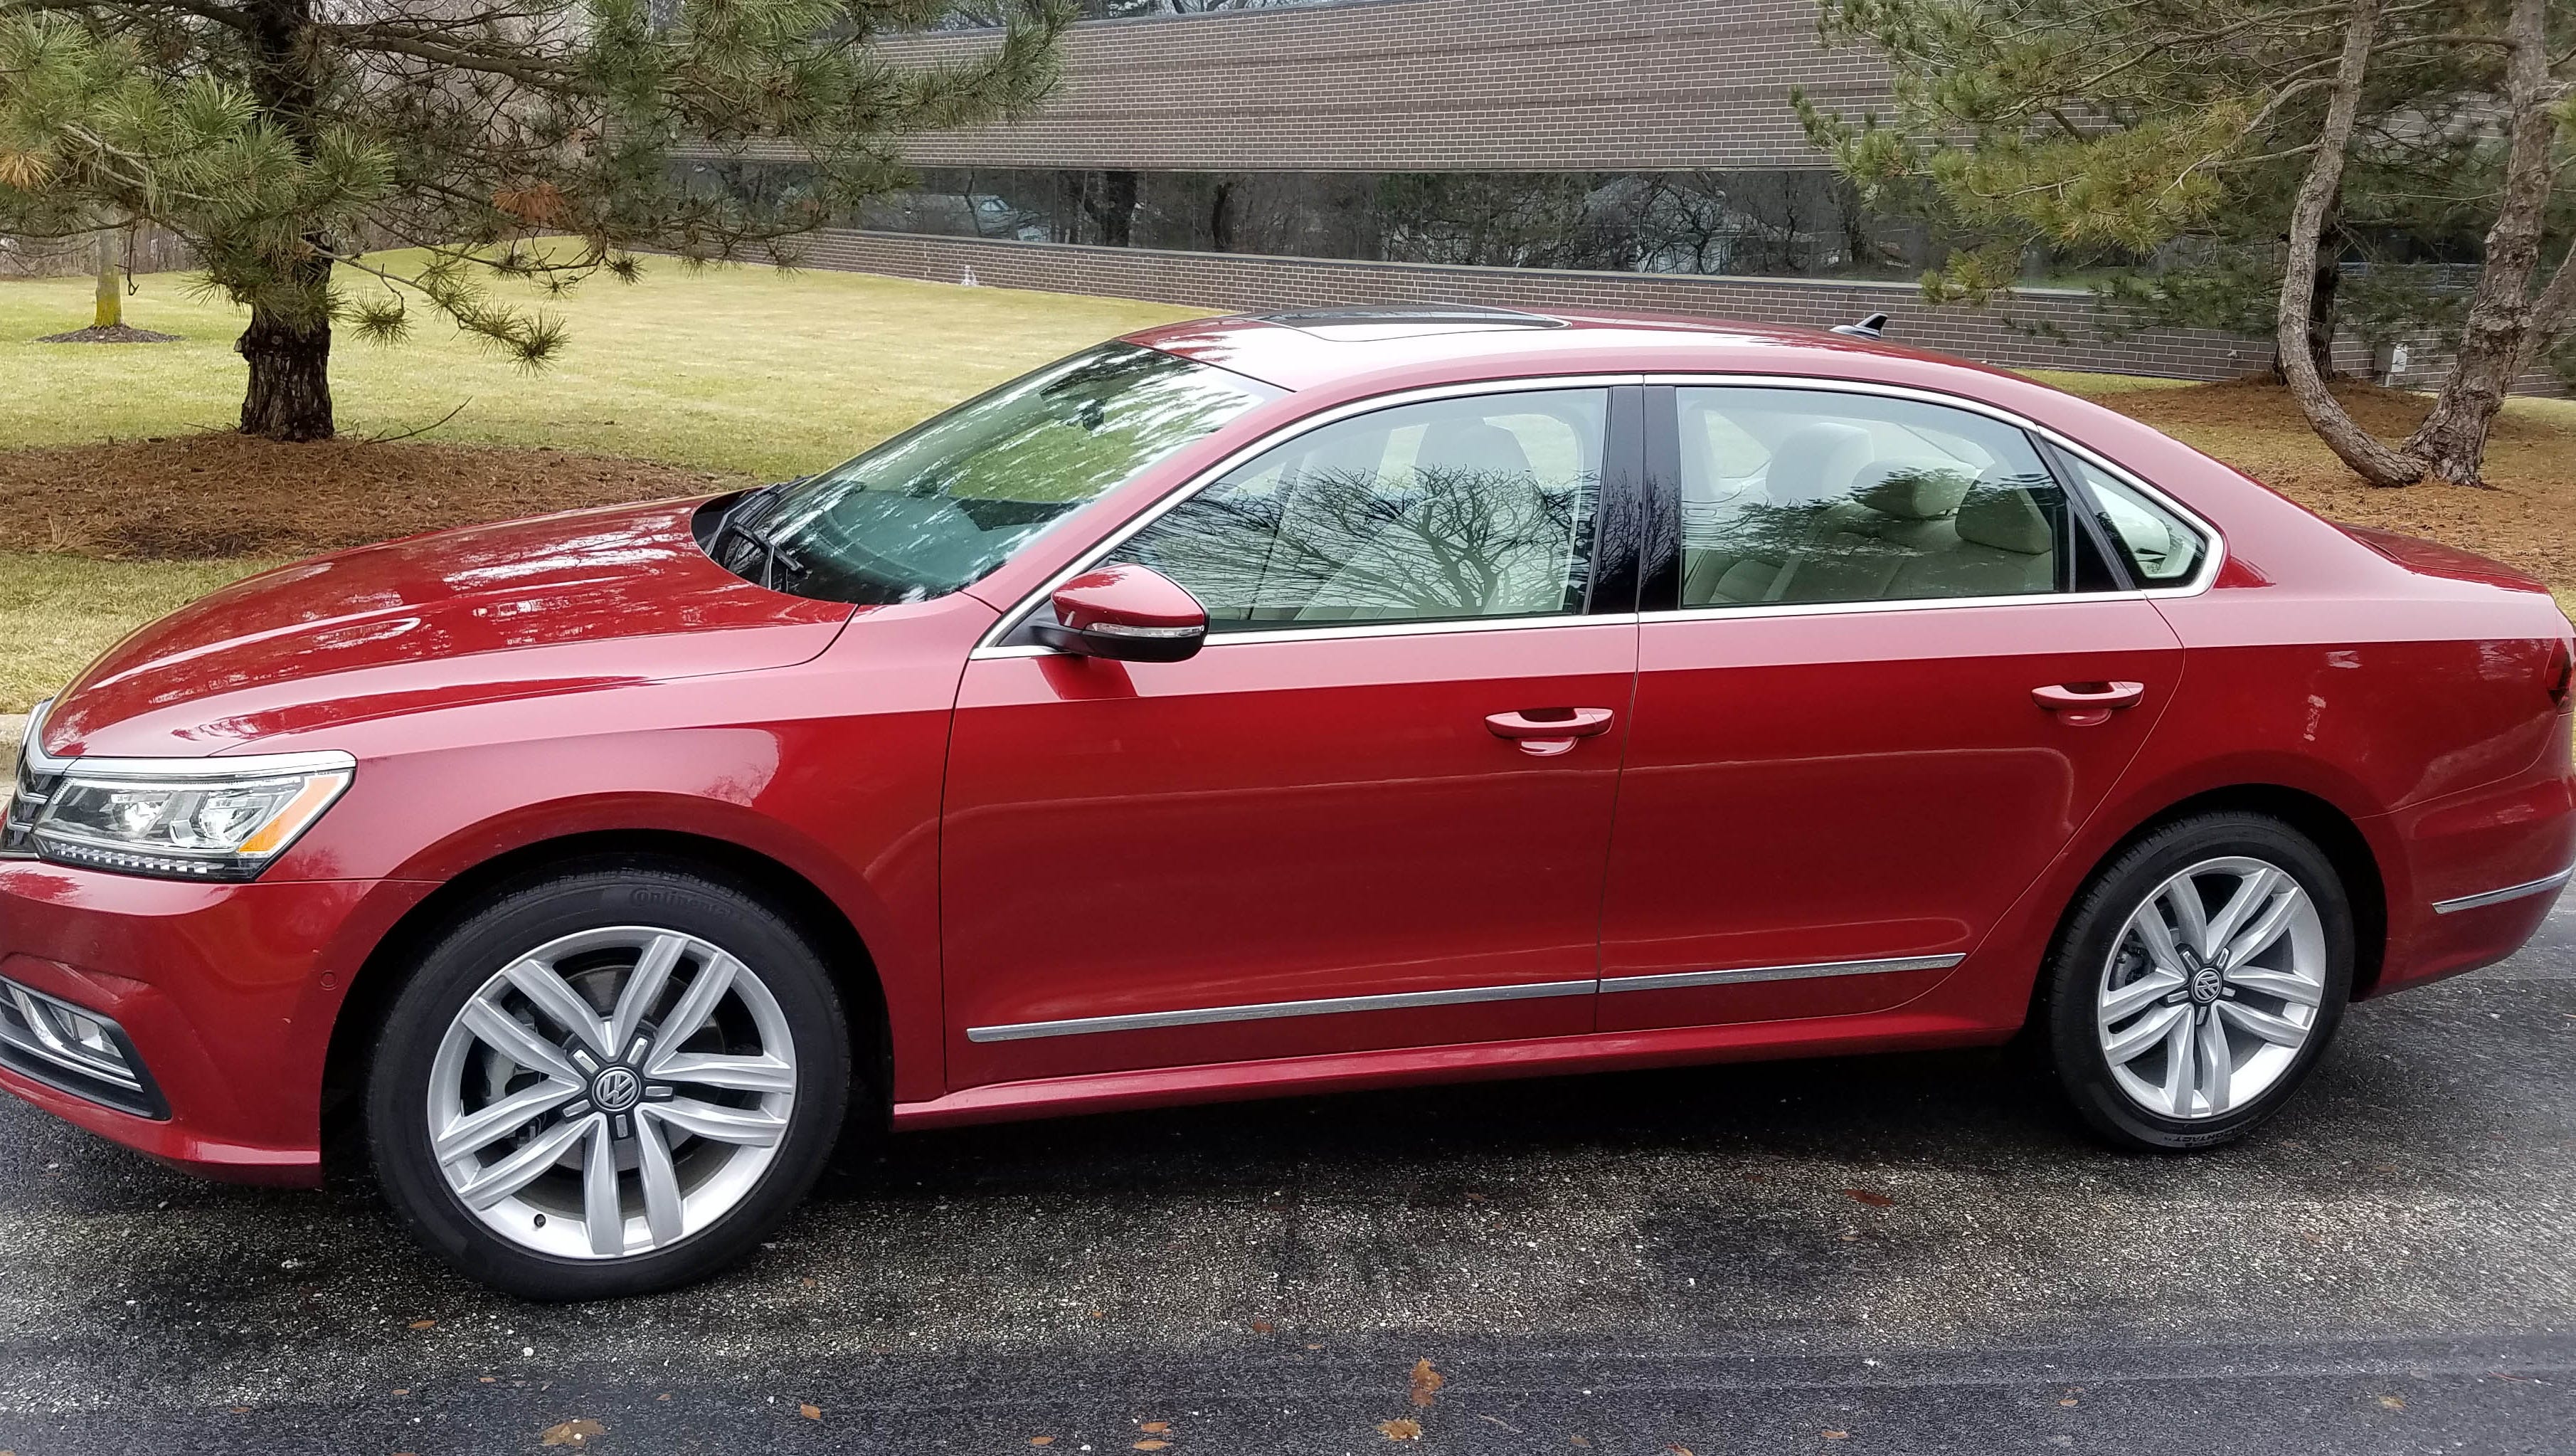 VW's 2017 Passat scores with ride, power and handling